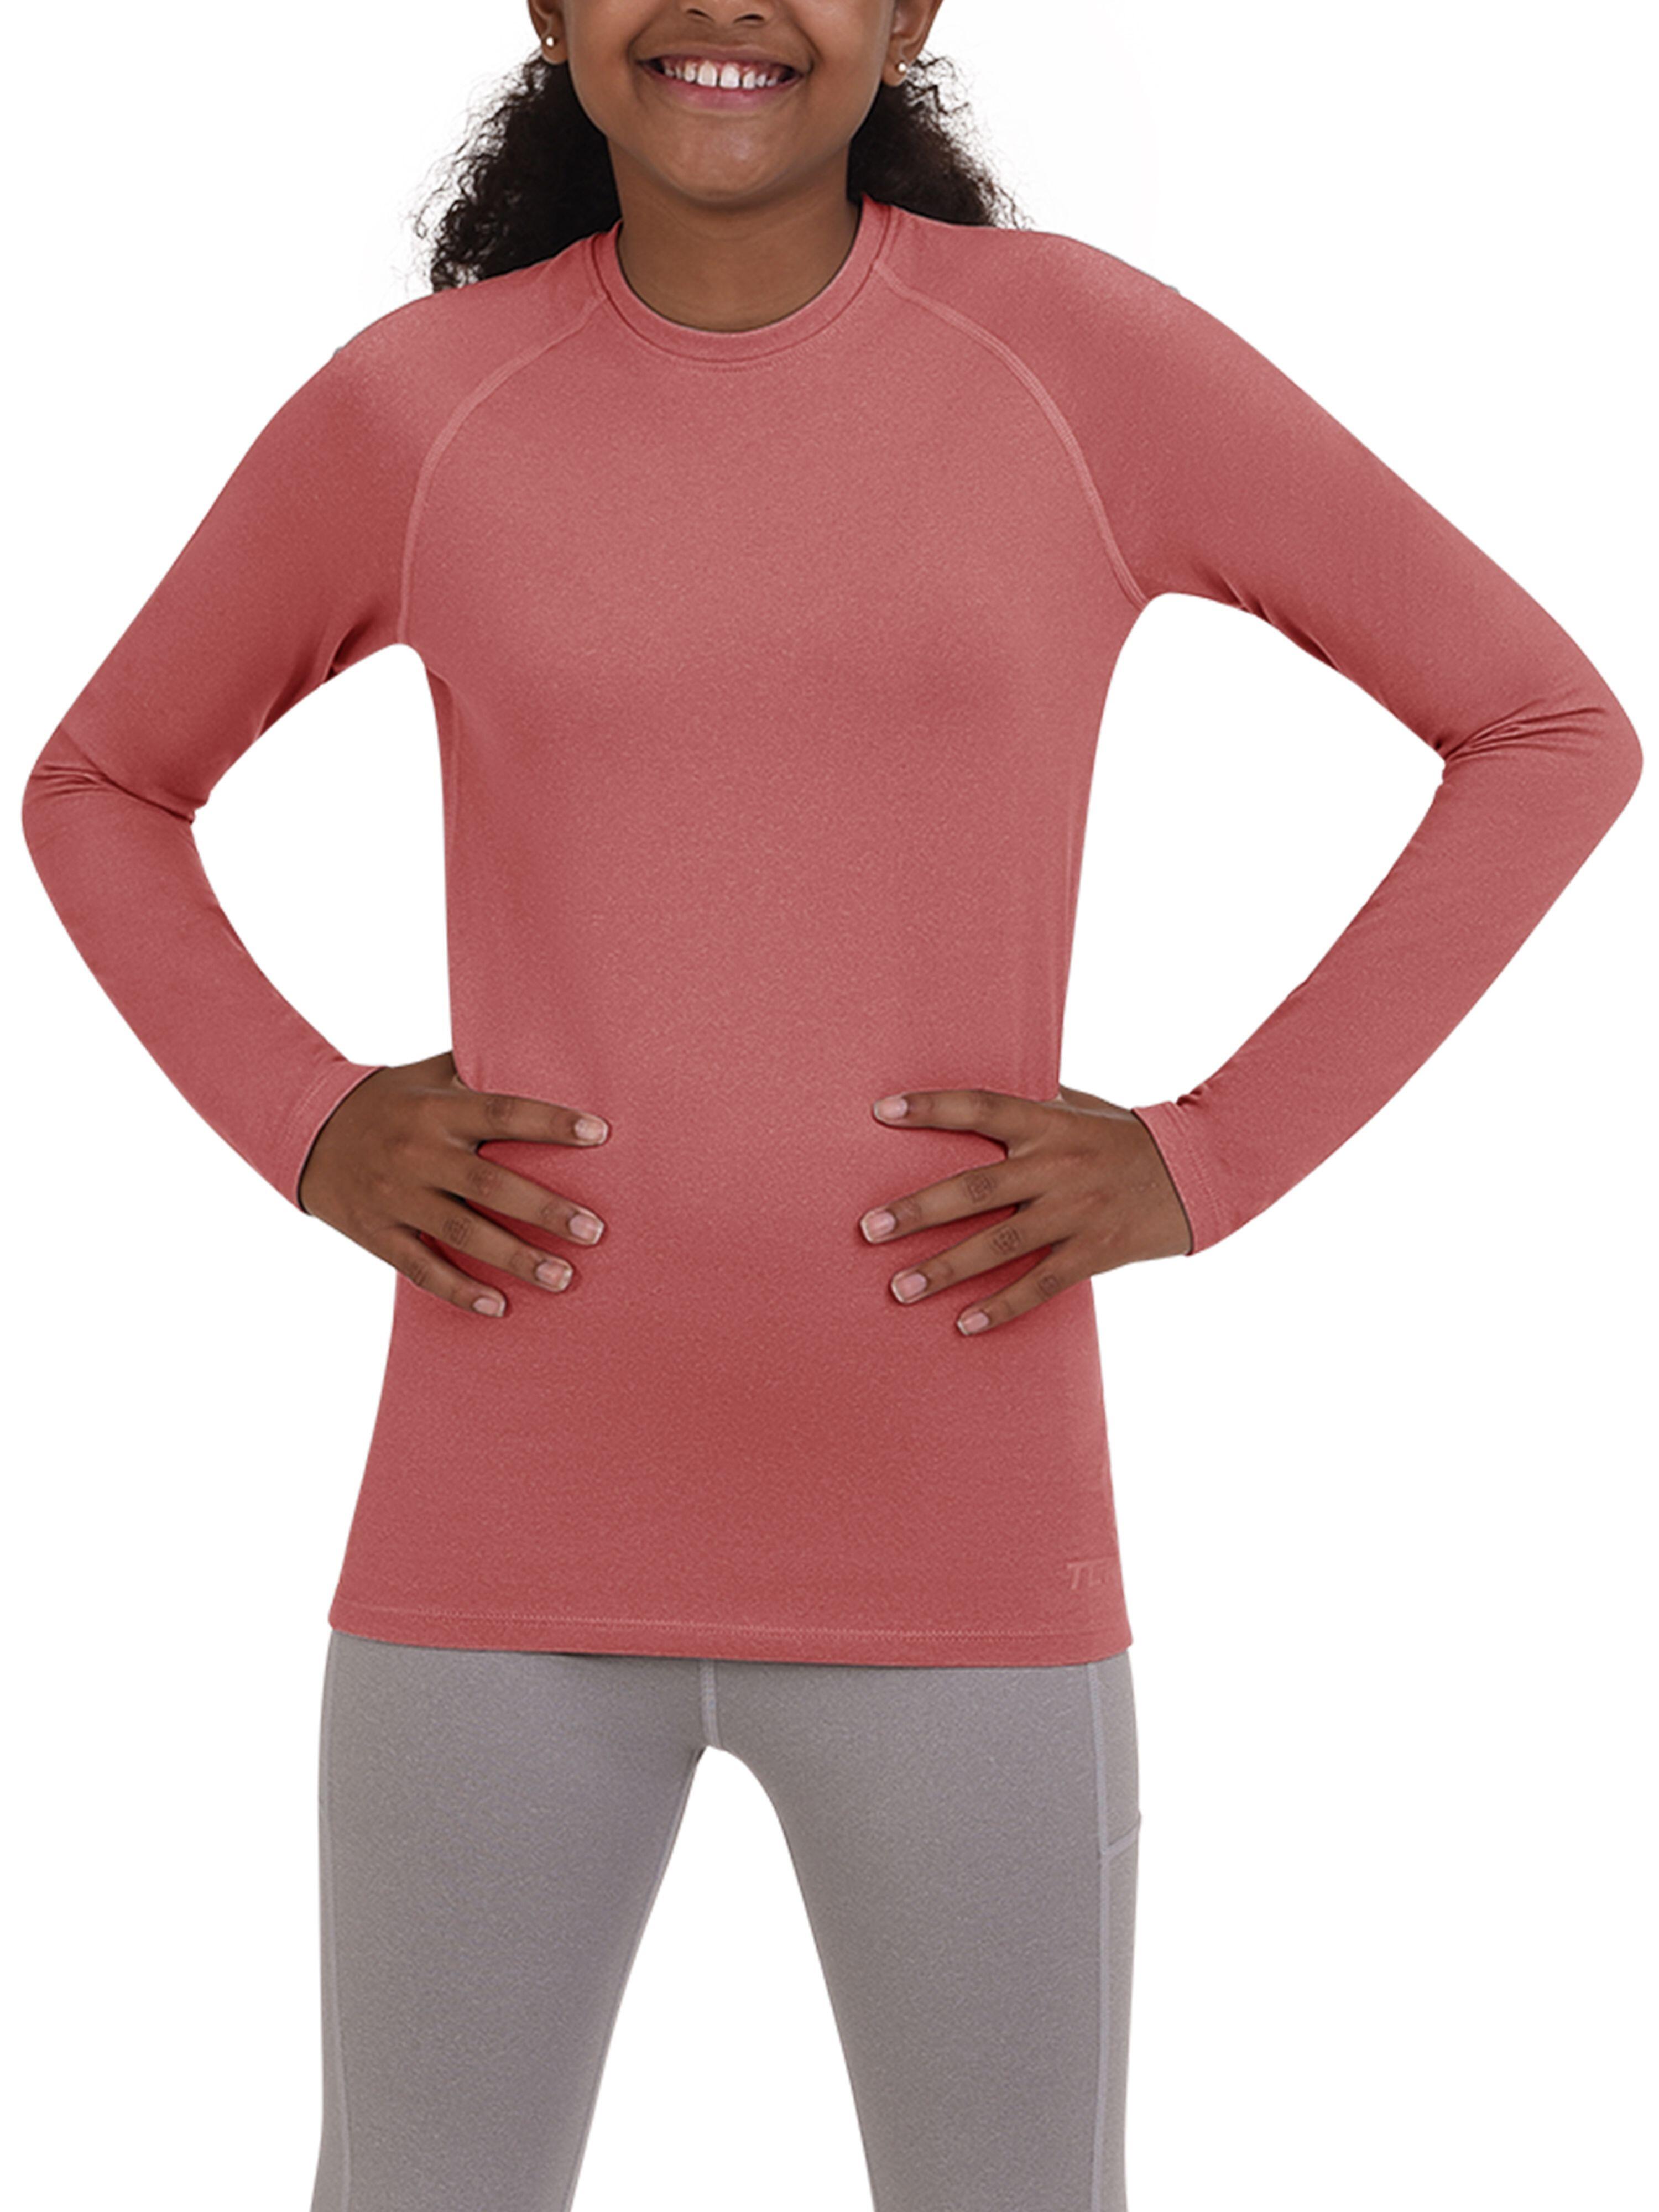 TCA Girls' Super Thermal Base Layer Top - Dusty Rose Marl